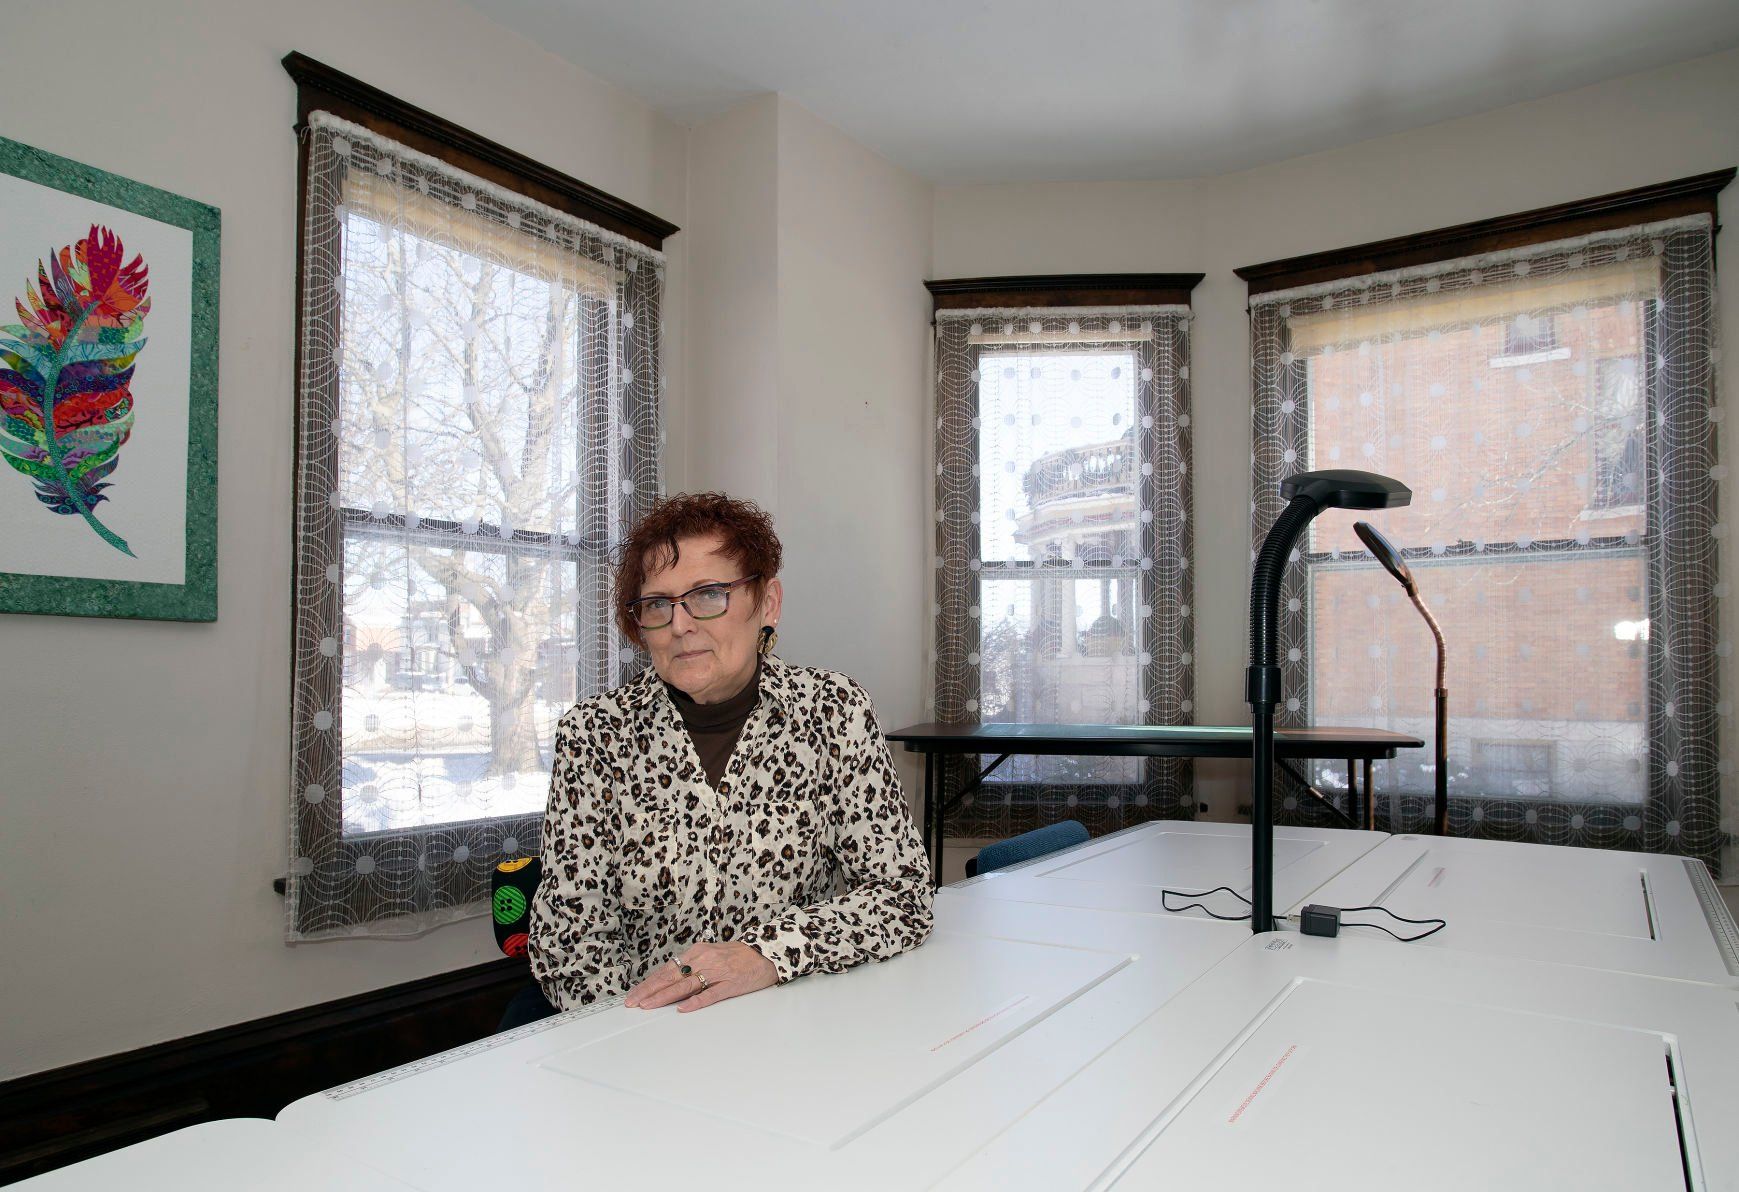 Owner Carol Long sits inside the historic DeWitt House which she plans to rent out as "A Stitch in Time" retreat in Platteville, Wis., on Friday, Jan. 28, 2022.    PHOTO CREDIT: Stephen Gassman